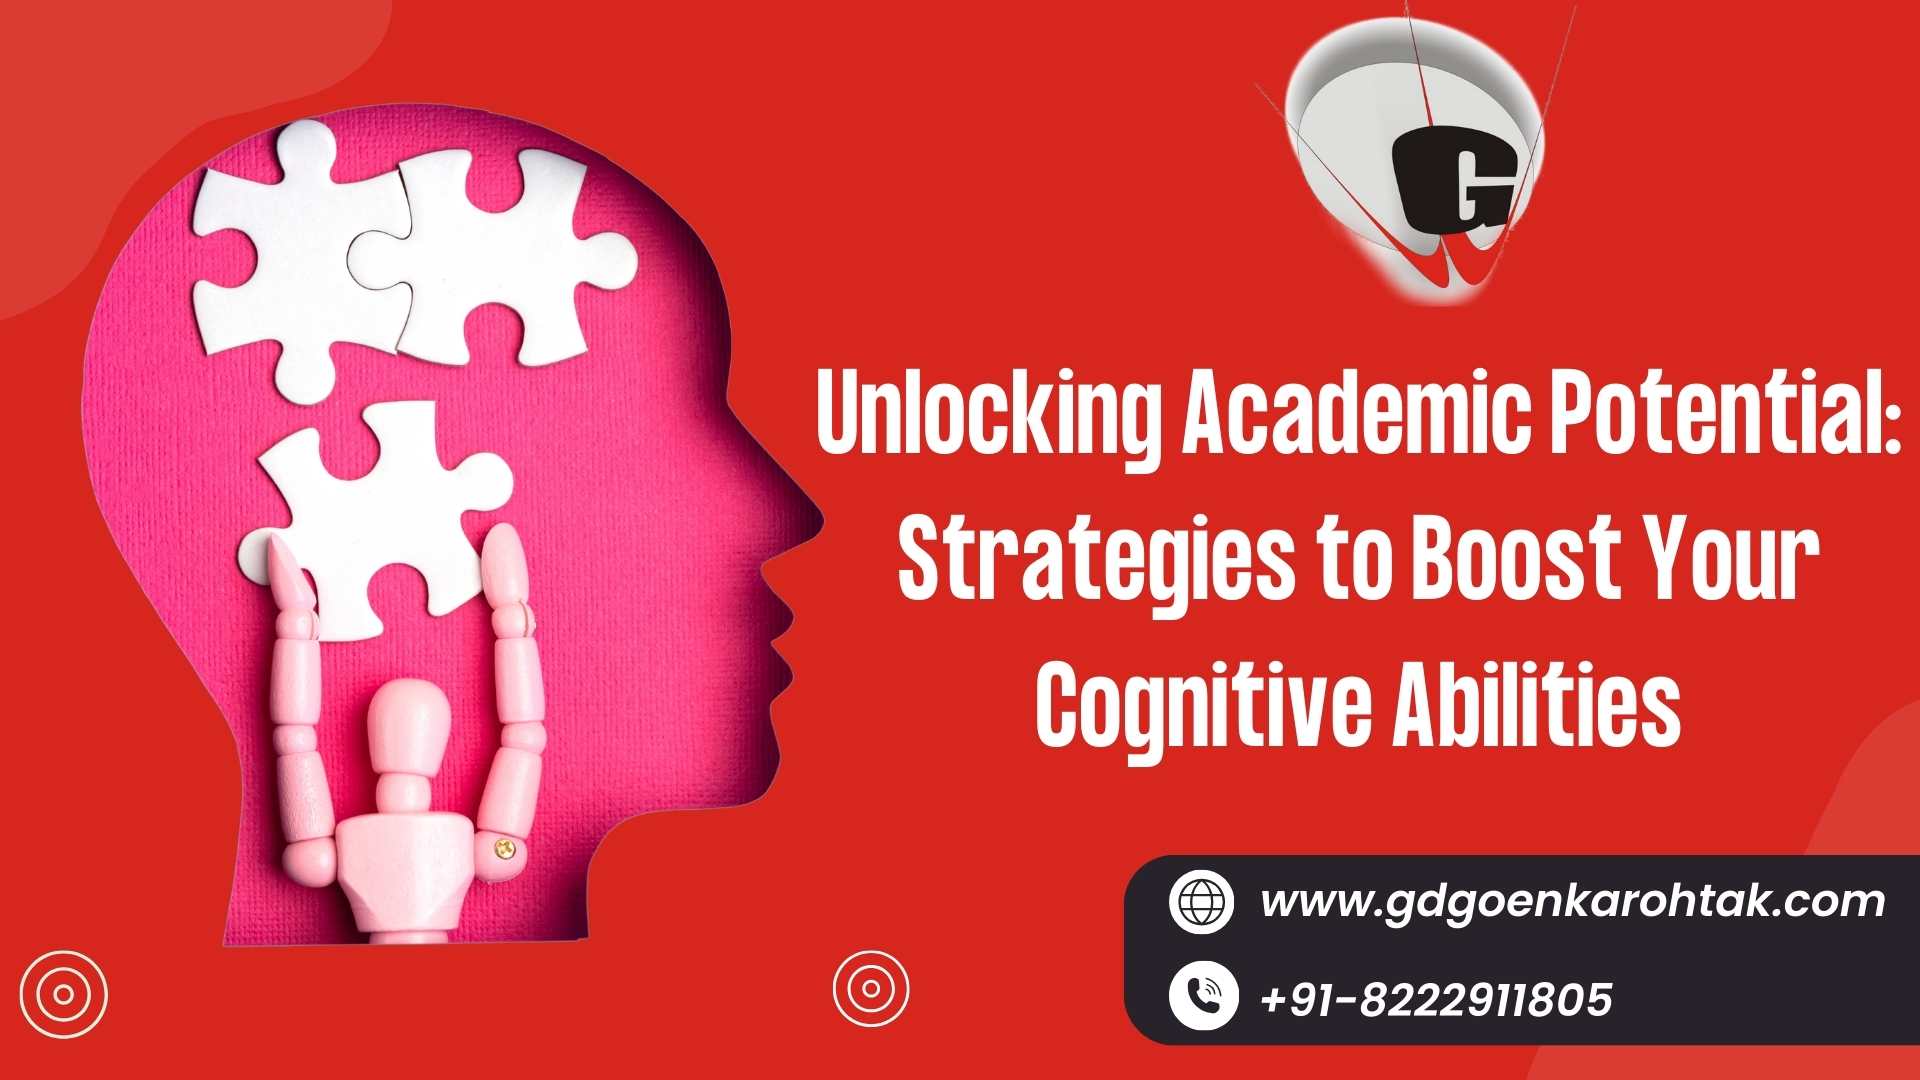 Strategies to Boost Your Cognitive Abilities